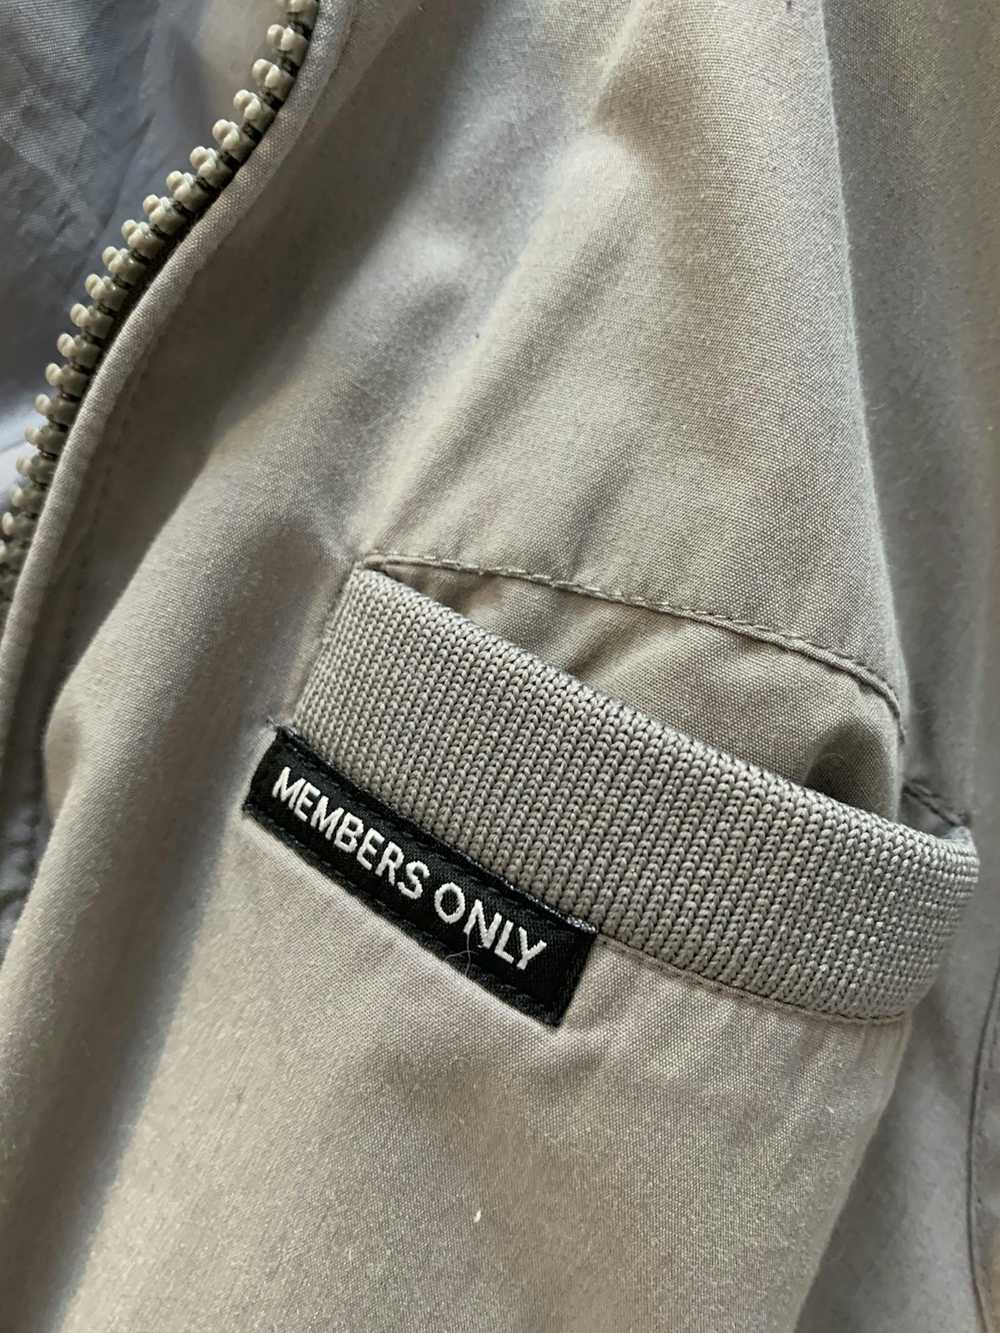 Members Only Members Only Jacket - image 3